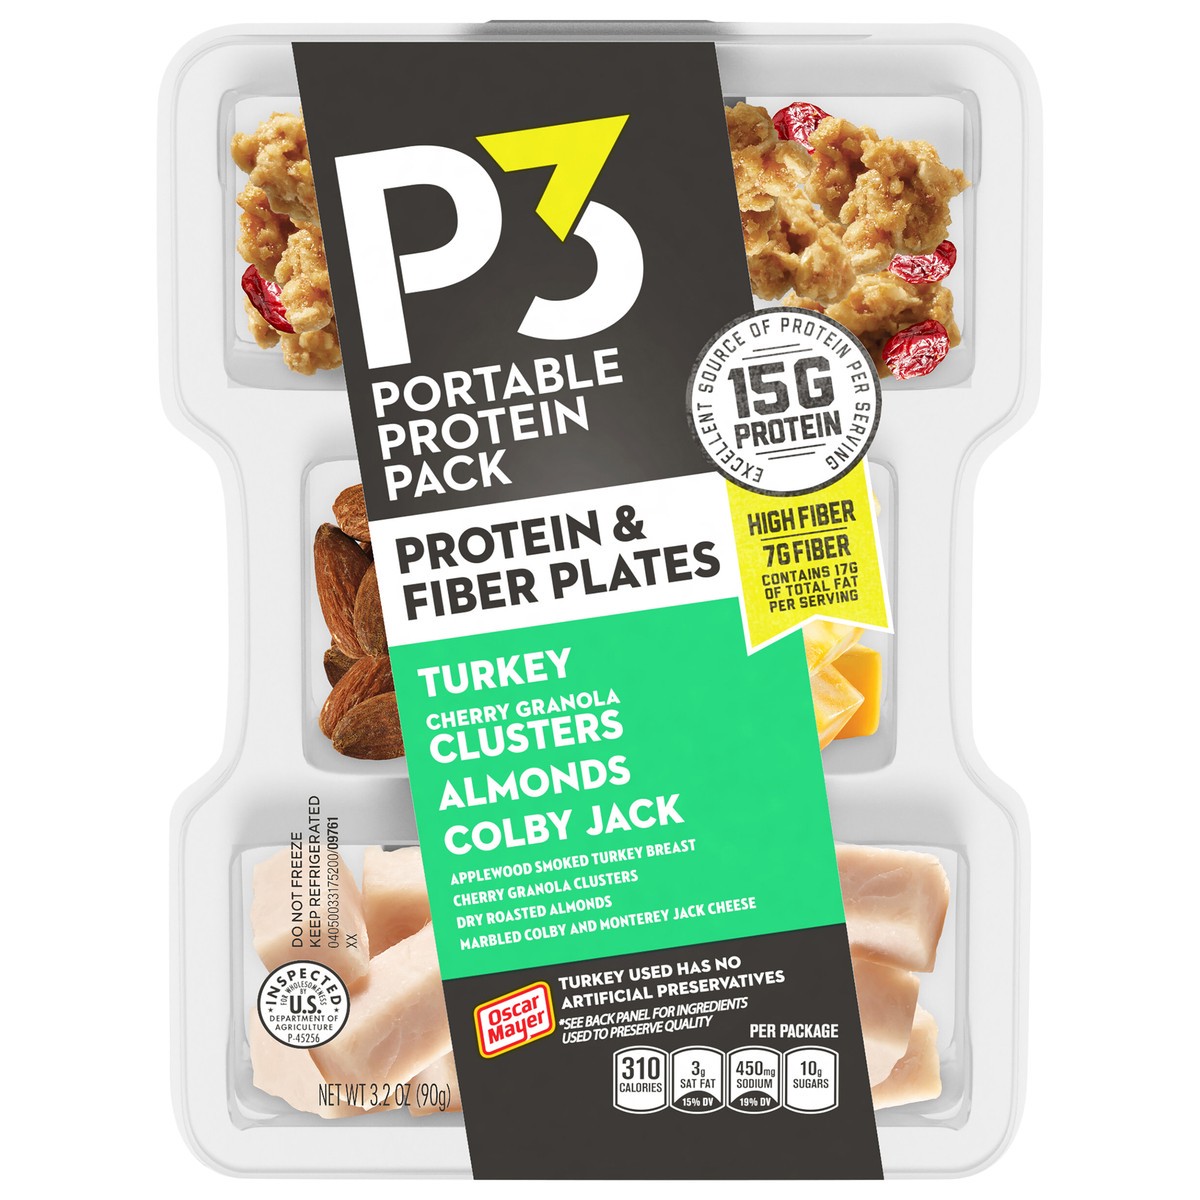 slide 1 of 8, P3 Portable Protein Snack Pack & Fiber Plate with Turkey, Cherry Granola Clusters, Almonds & Colby Jack Cheese, 3.2 oz Tray, 3.2 oz